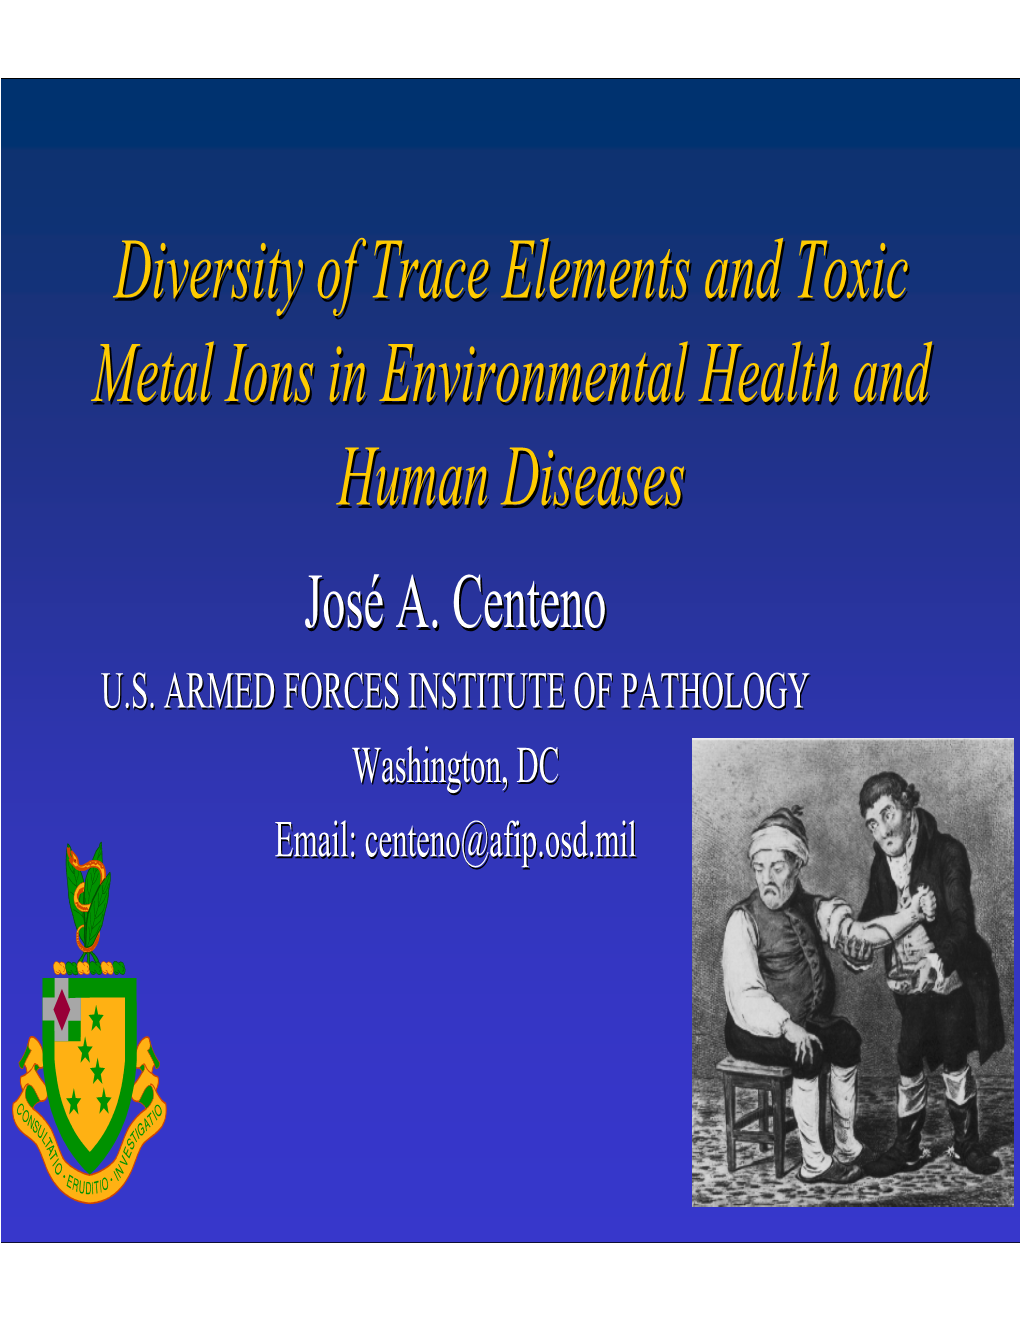 Diversity of Trace Elements and Toxic Metal Ions in Environmental Health